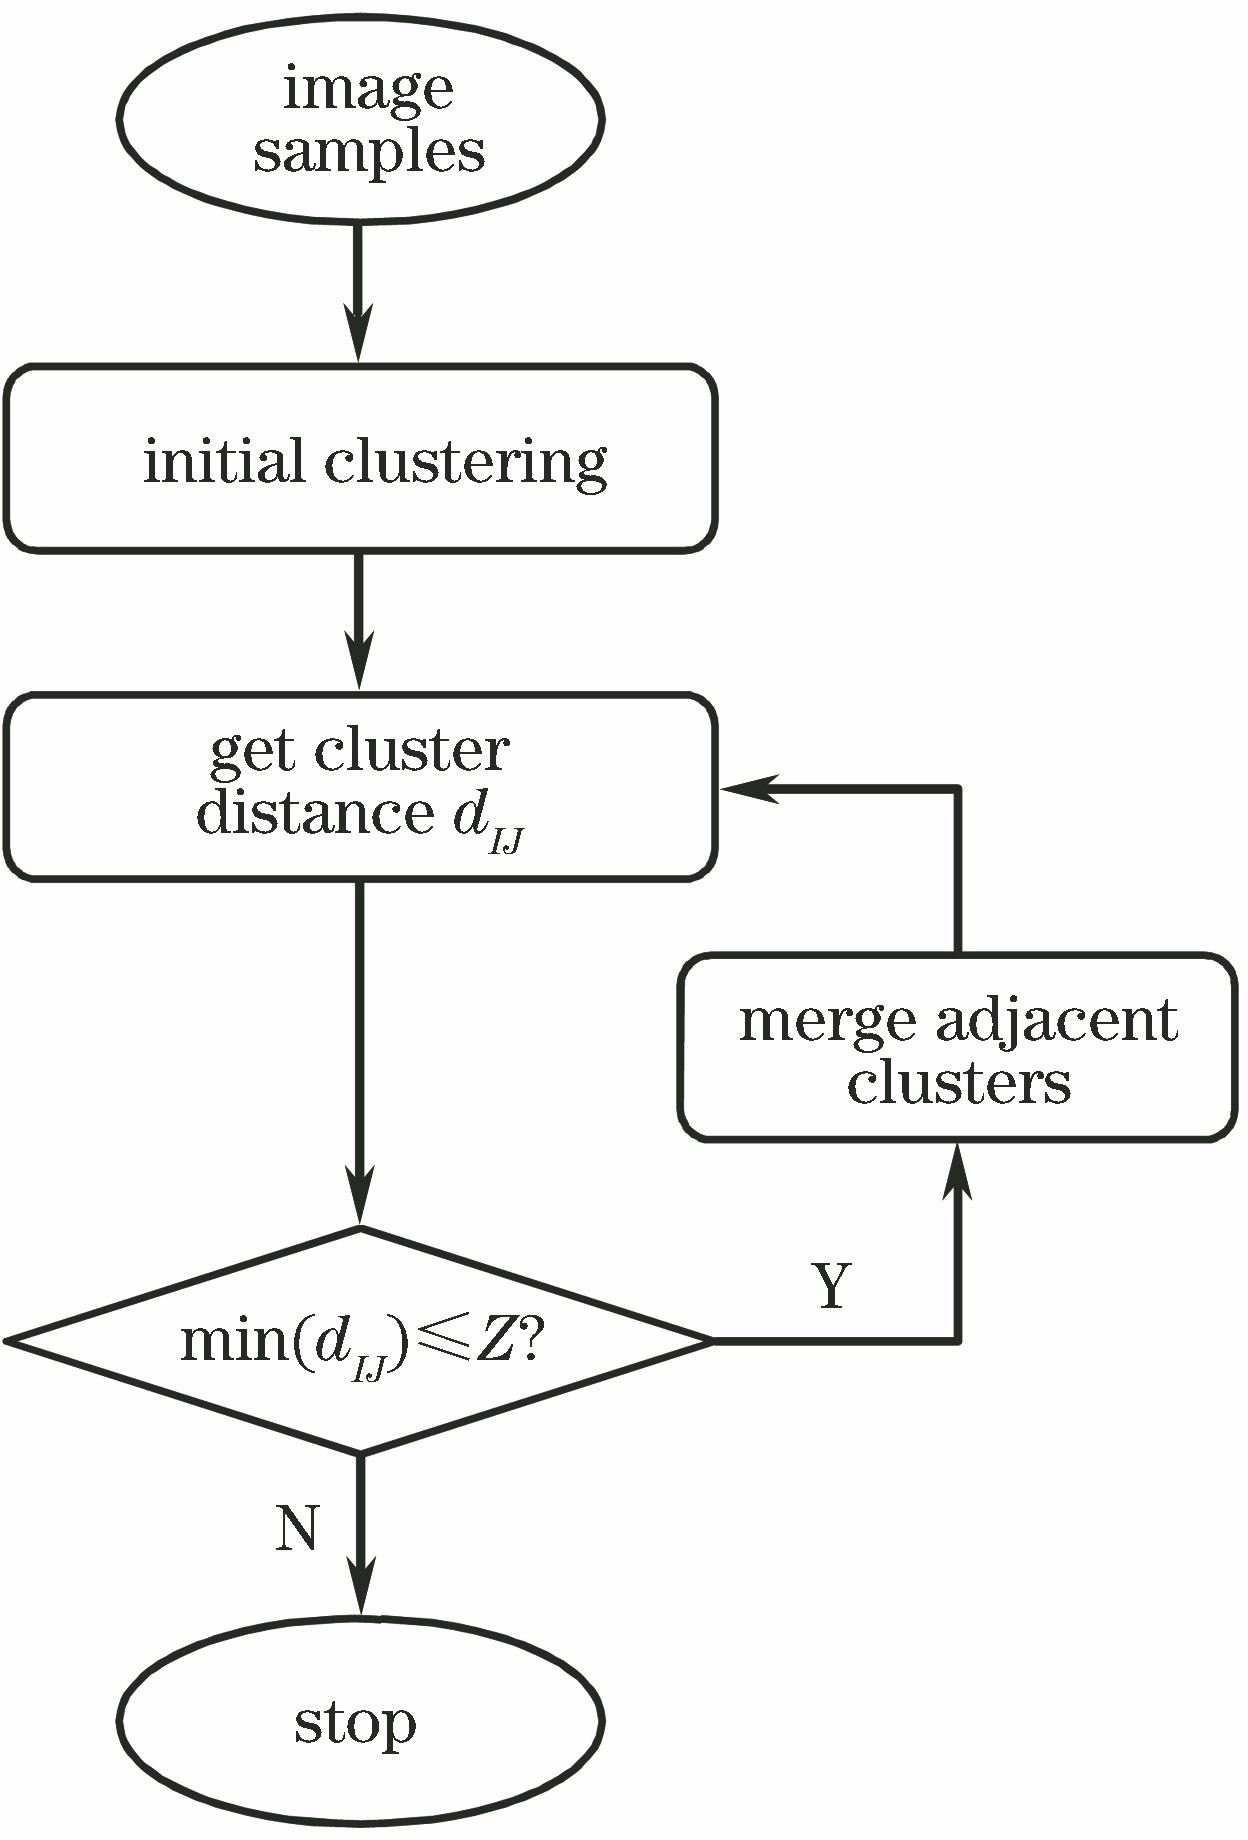 Flowchart of agglomerative hierarchical clustering